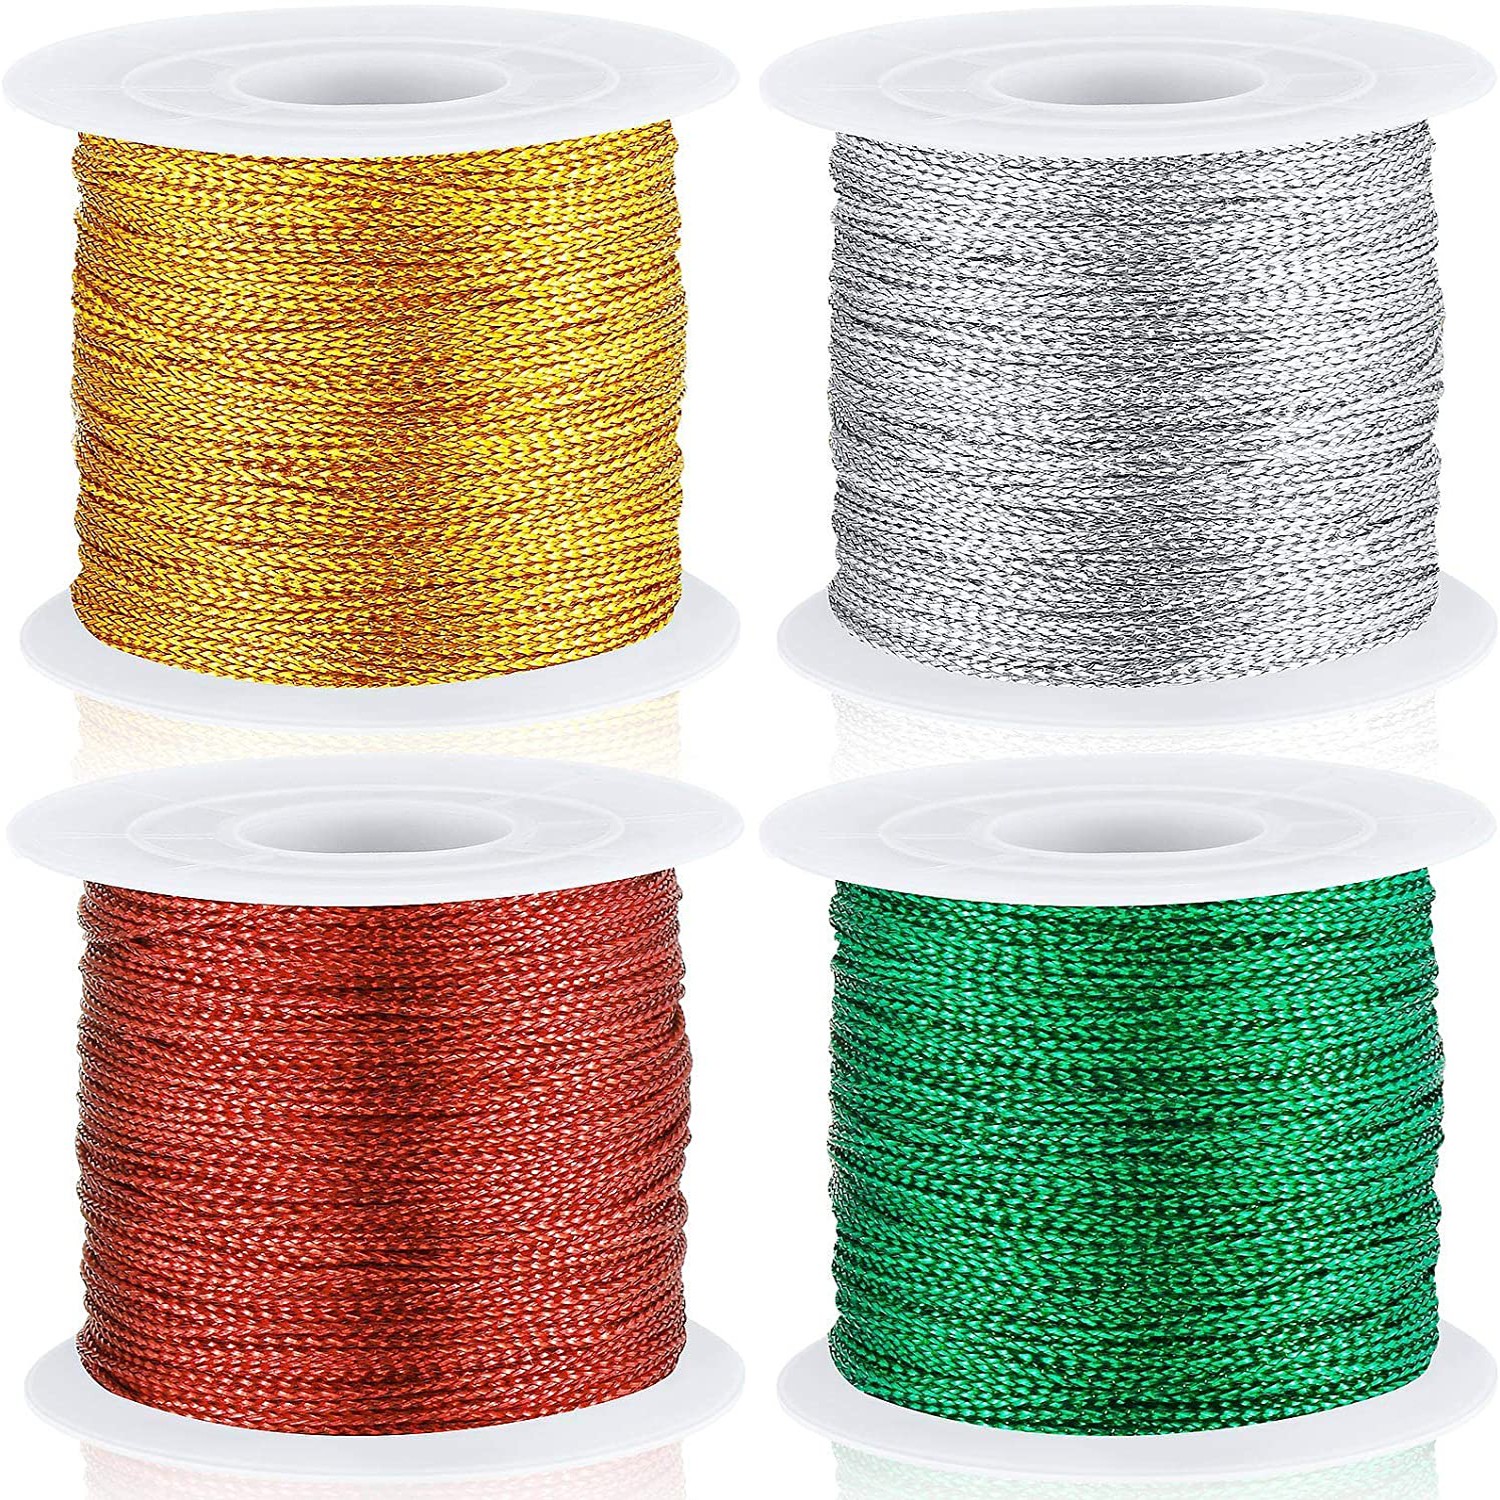 0.5/0.8/1.0/1.5/2.0/2.5/3.0mm Colorful Waxed Cord Cotton Thread Cord String  DIY